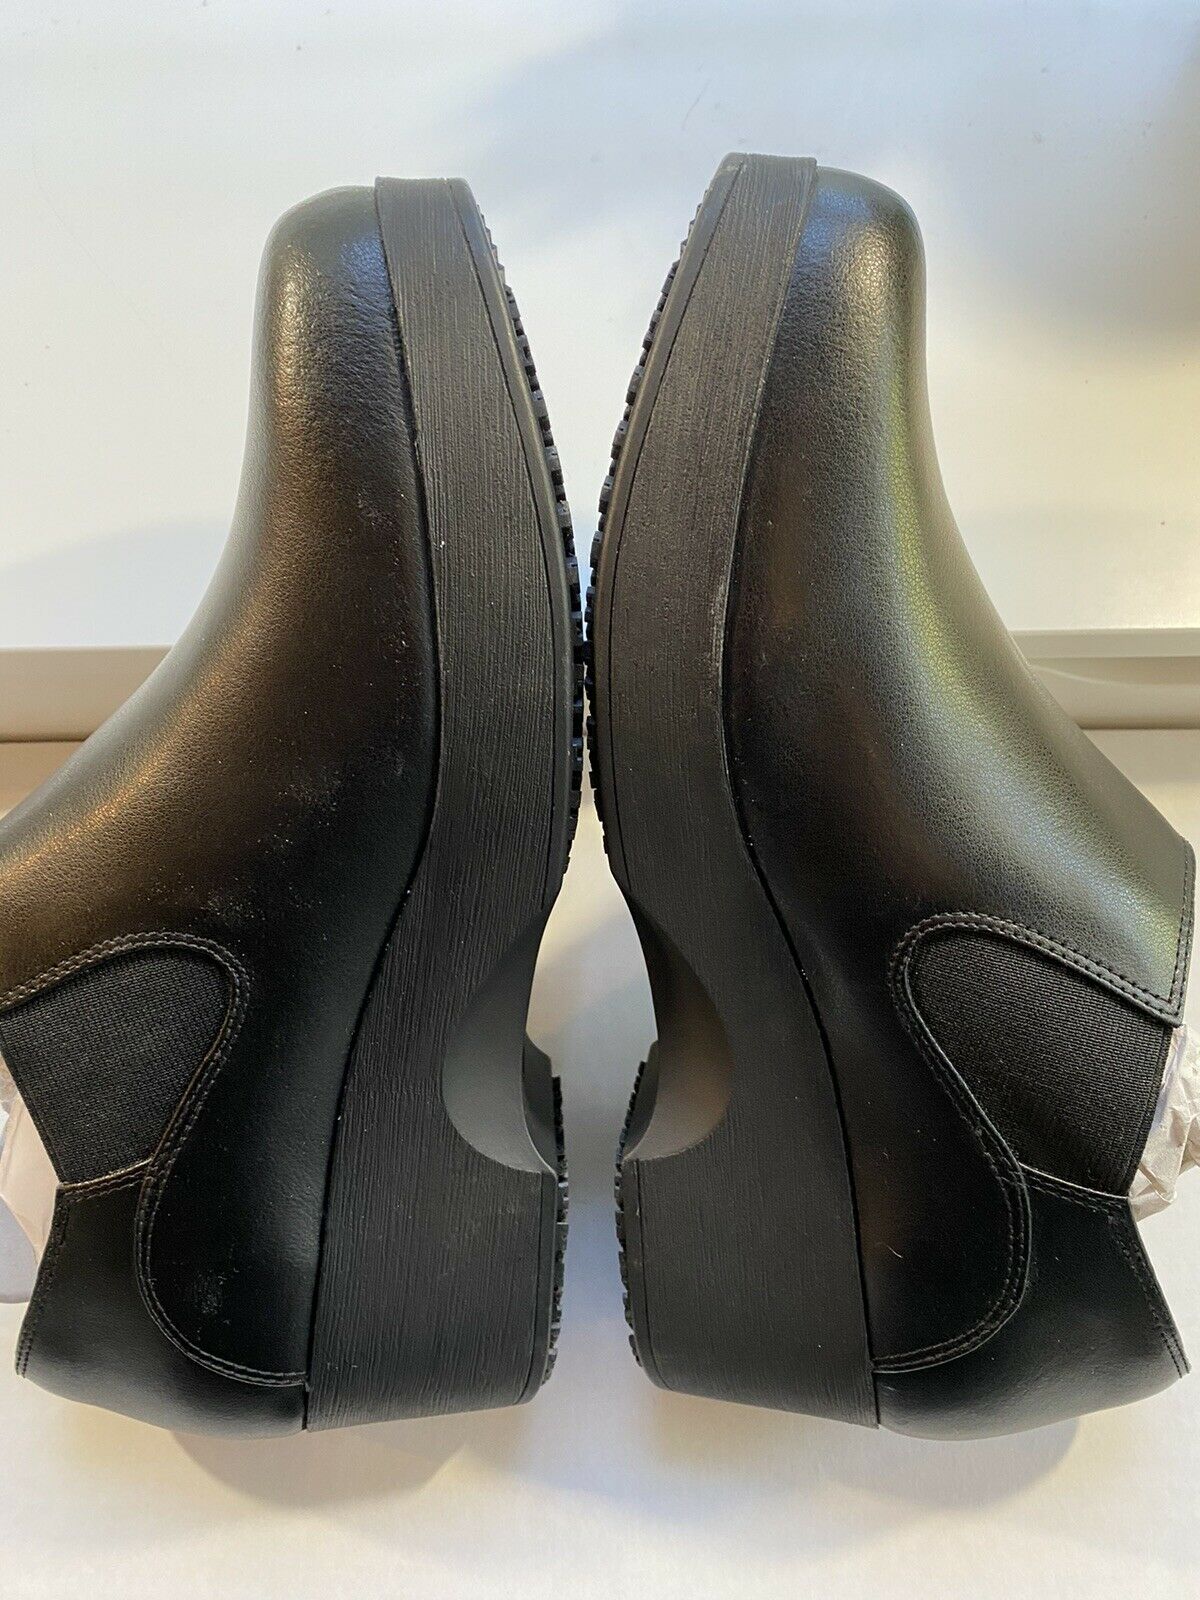 Shoes for Crews Black Kelsey Clogs 10 Style 43223 Slip, water and oil Resistant